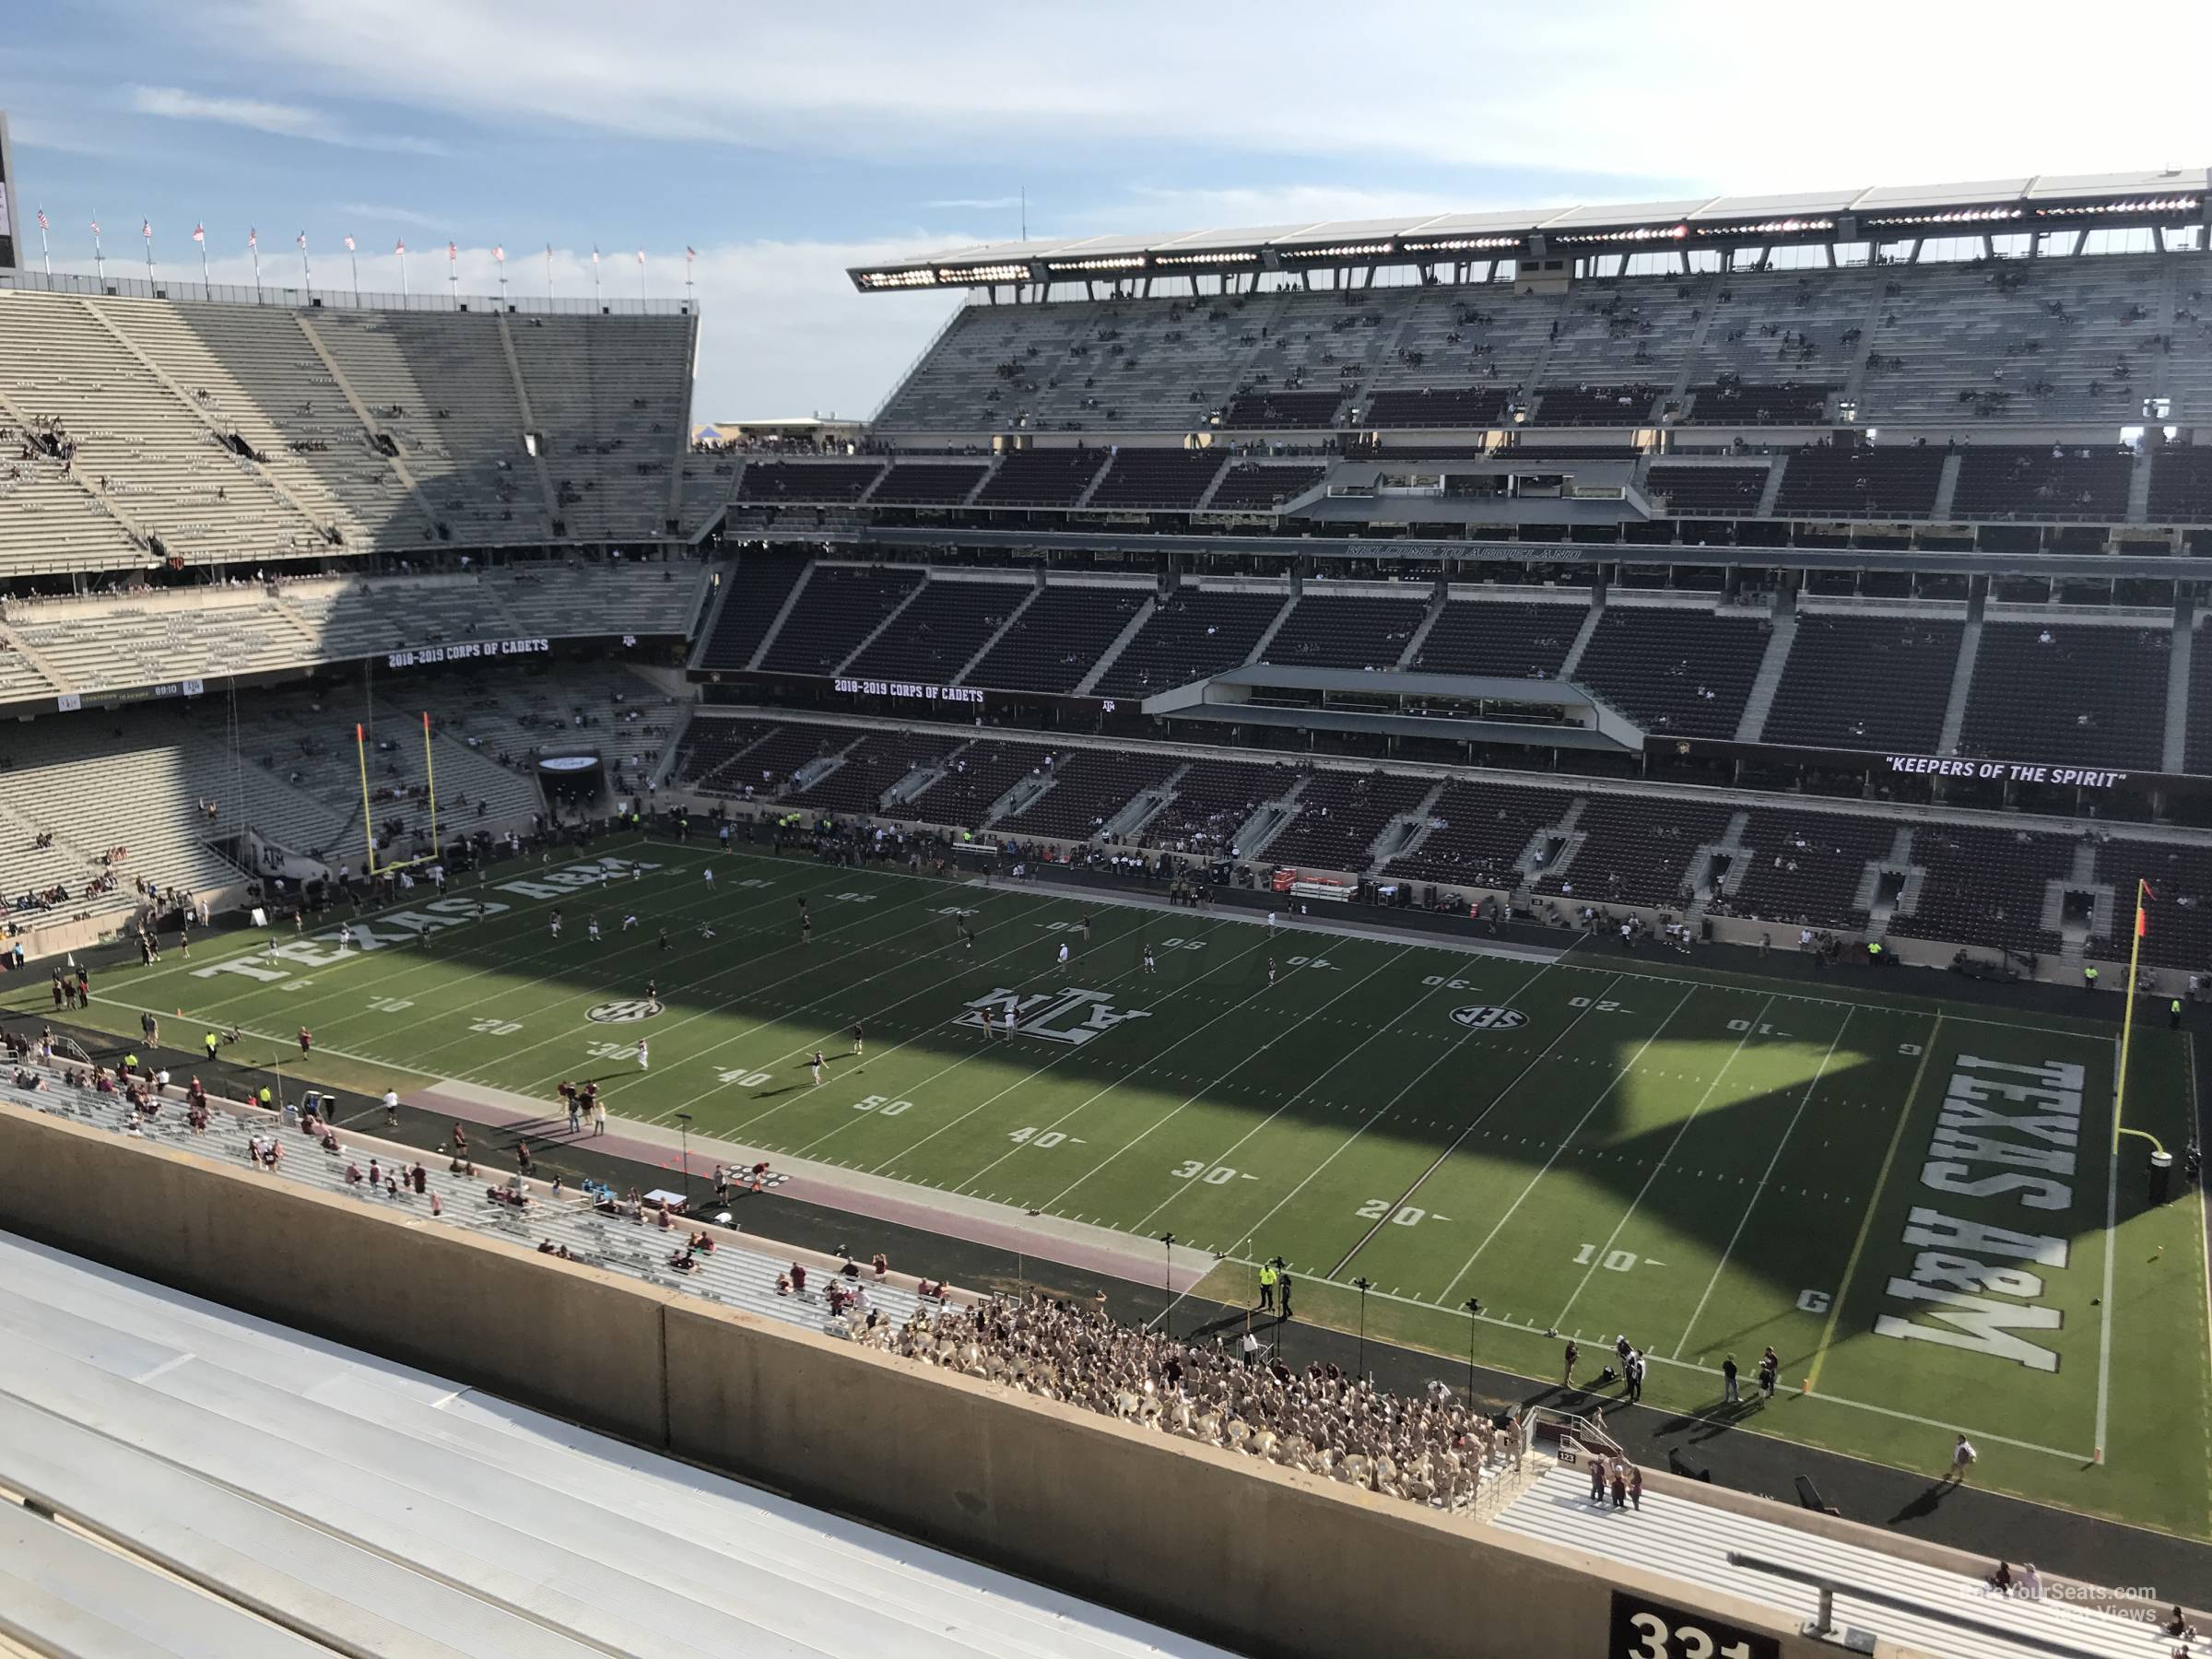 section 331, row 20 seat view  - kyle field